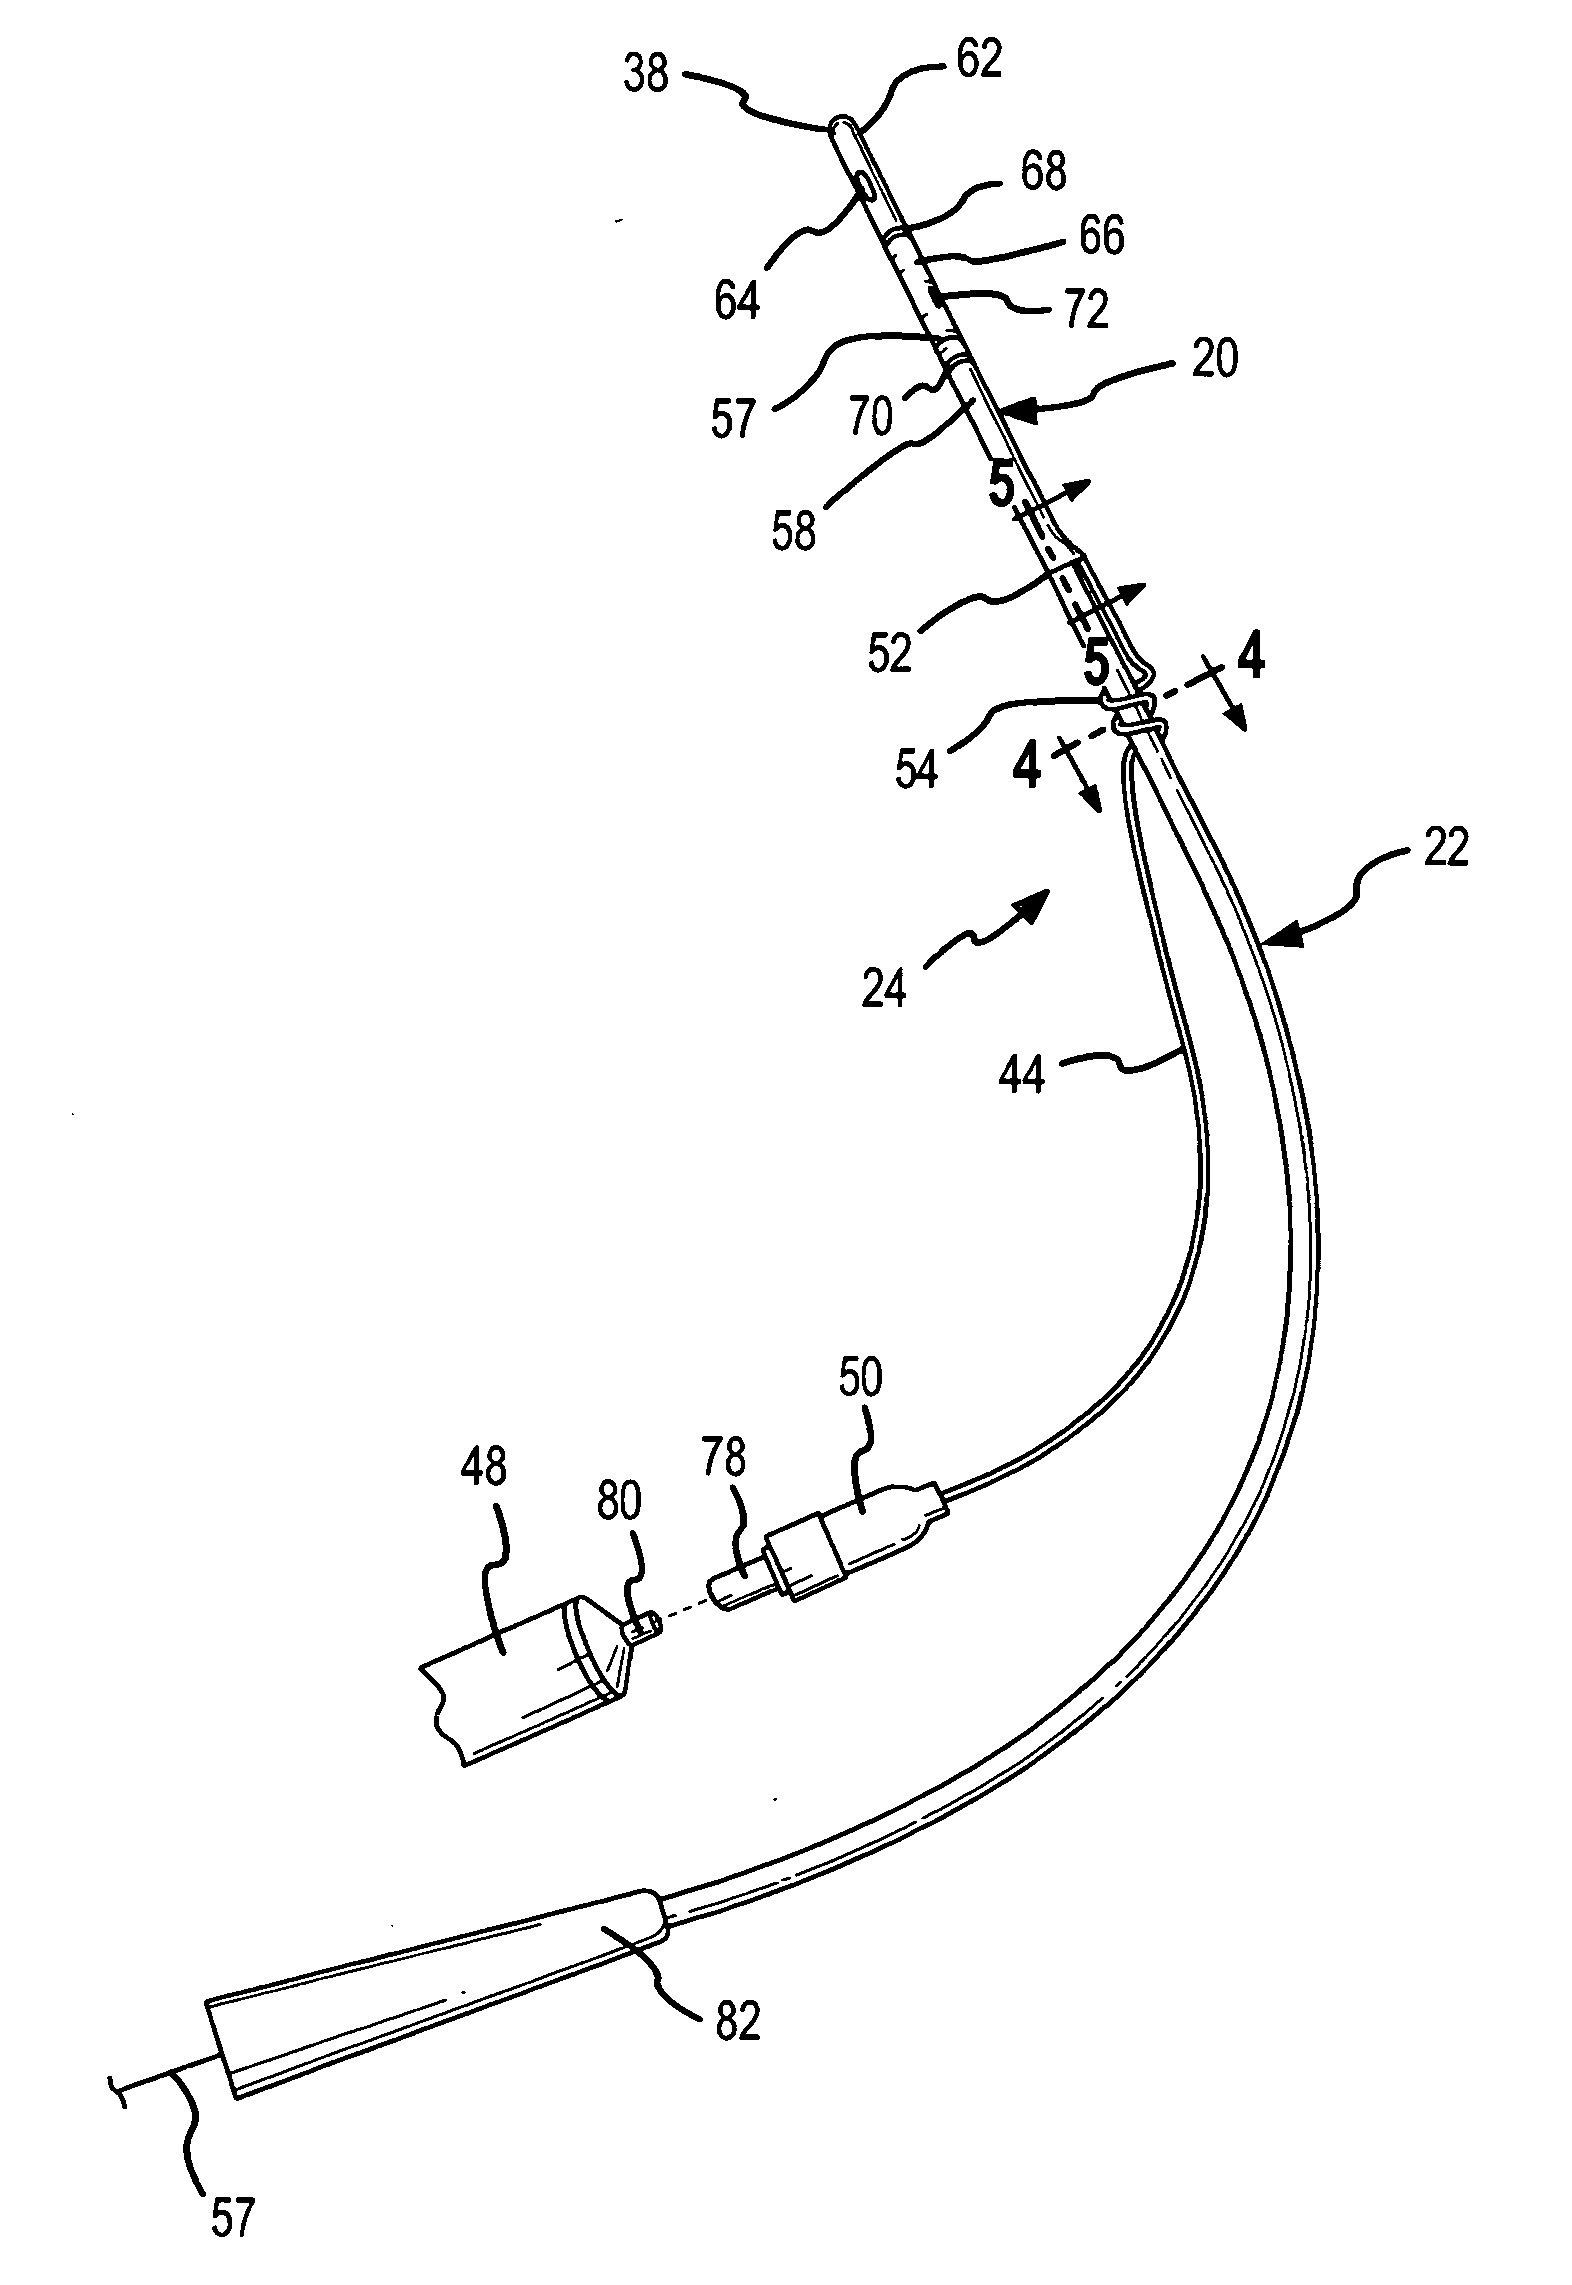 Partial-length indwelling urinary catheter and method permitting selective urine discharge